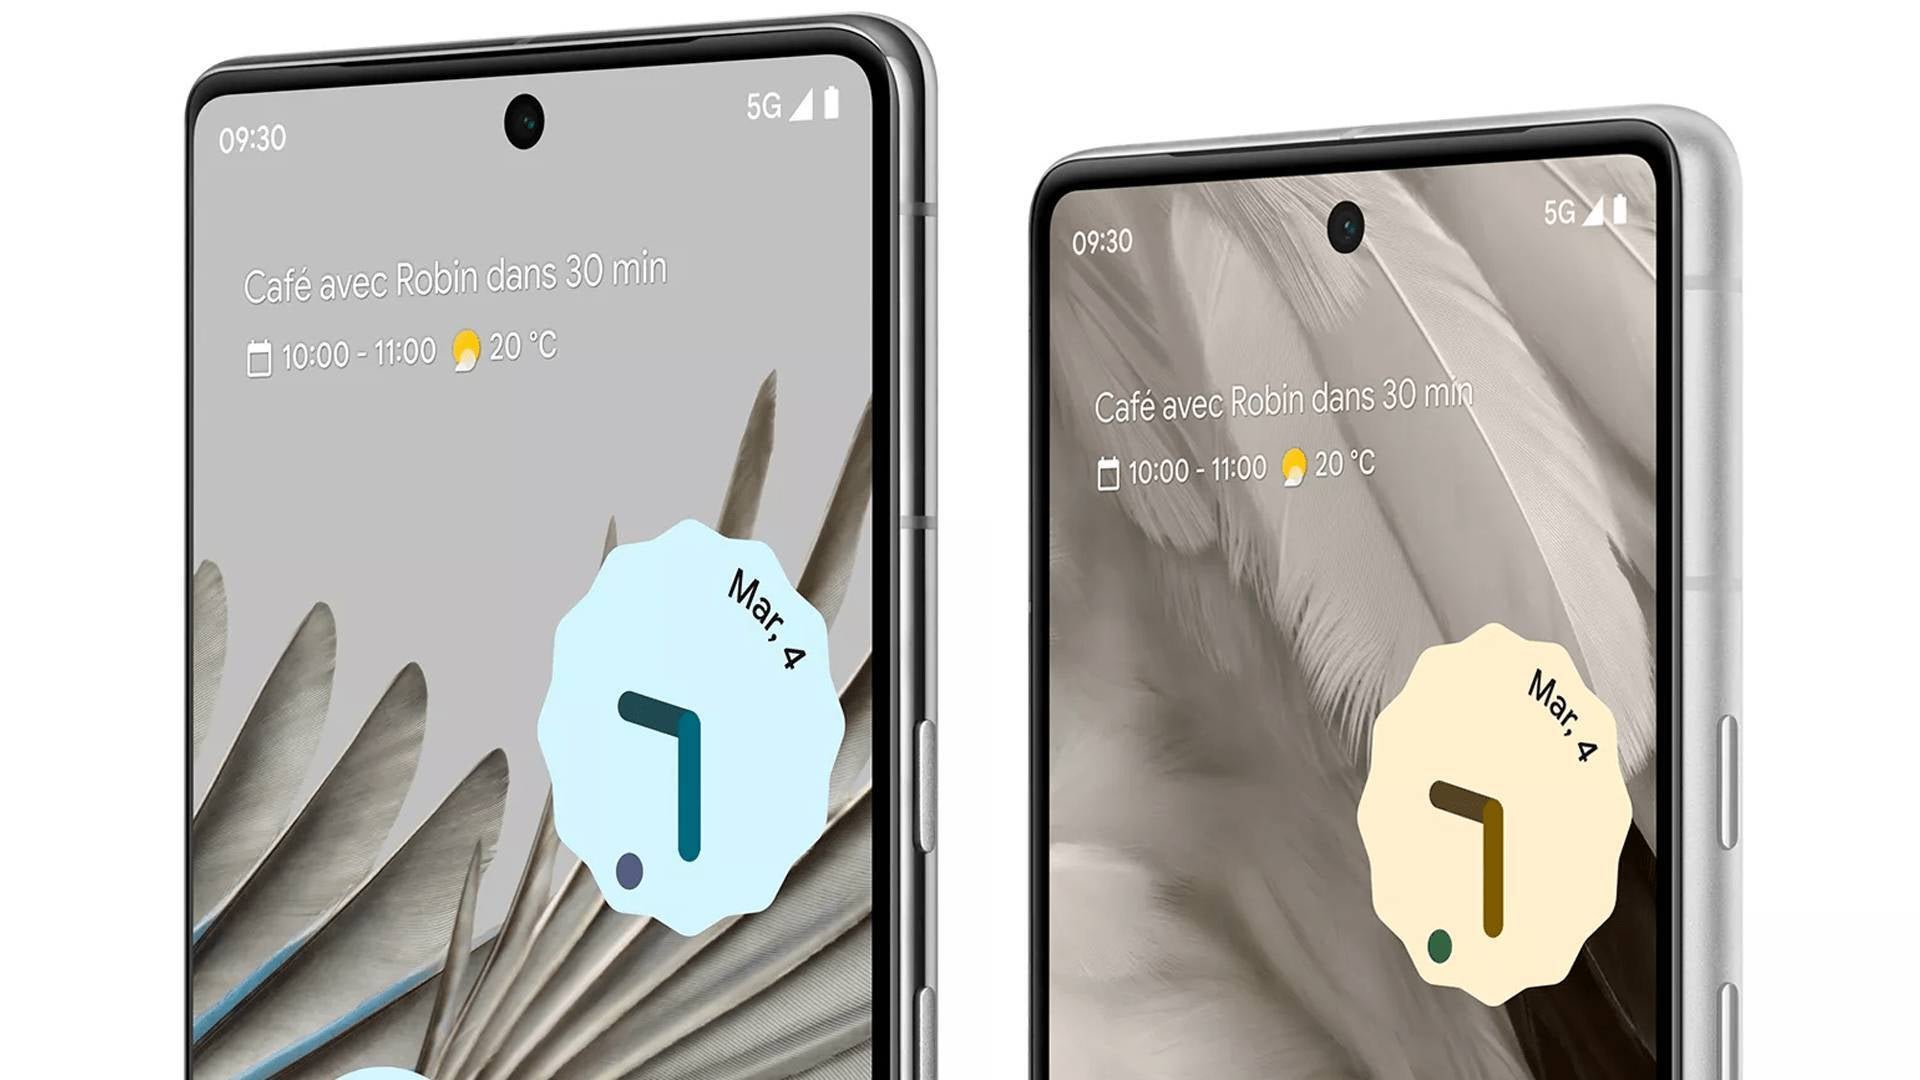 There may be no surprises left as every last bit of Pixel 7 details have leaked